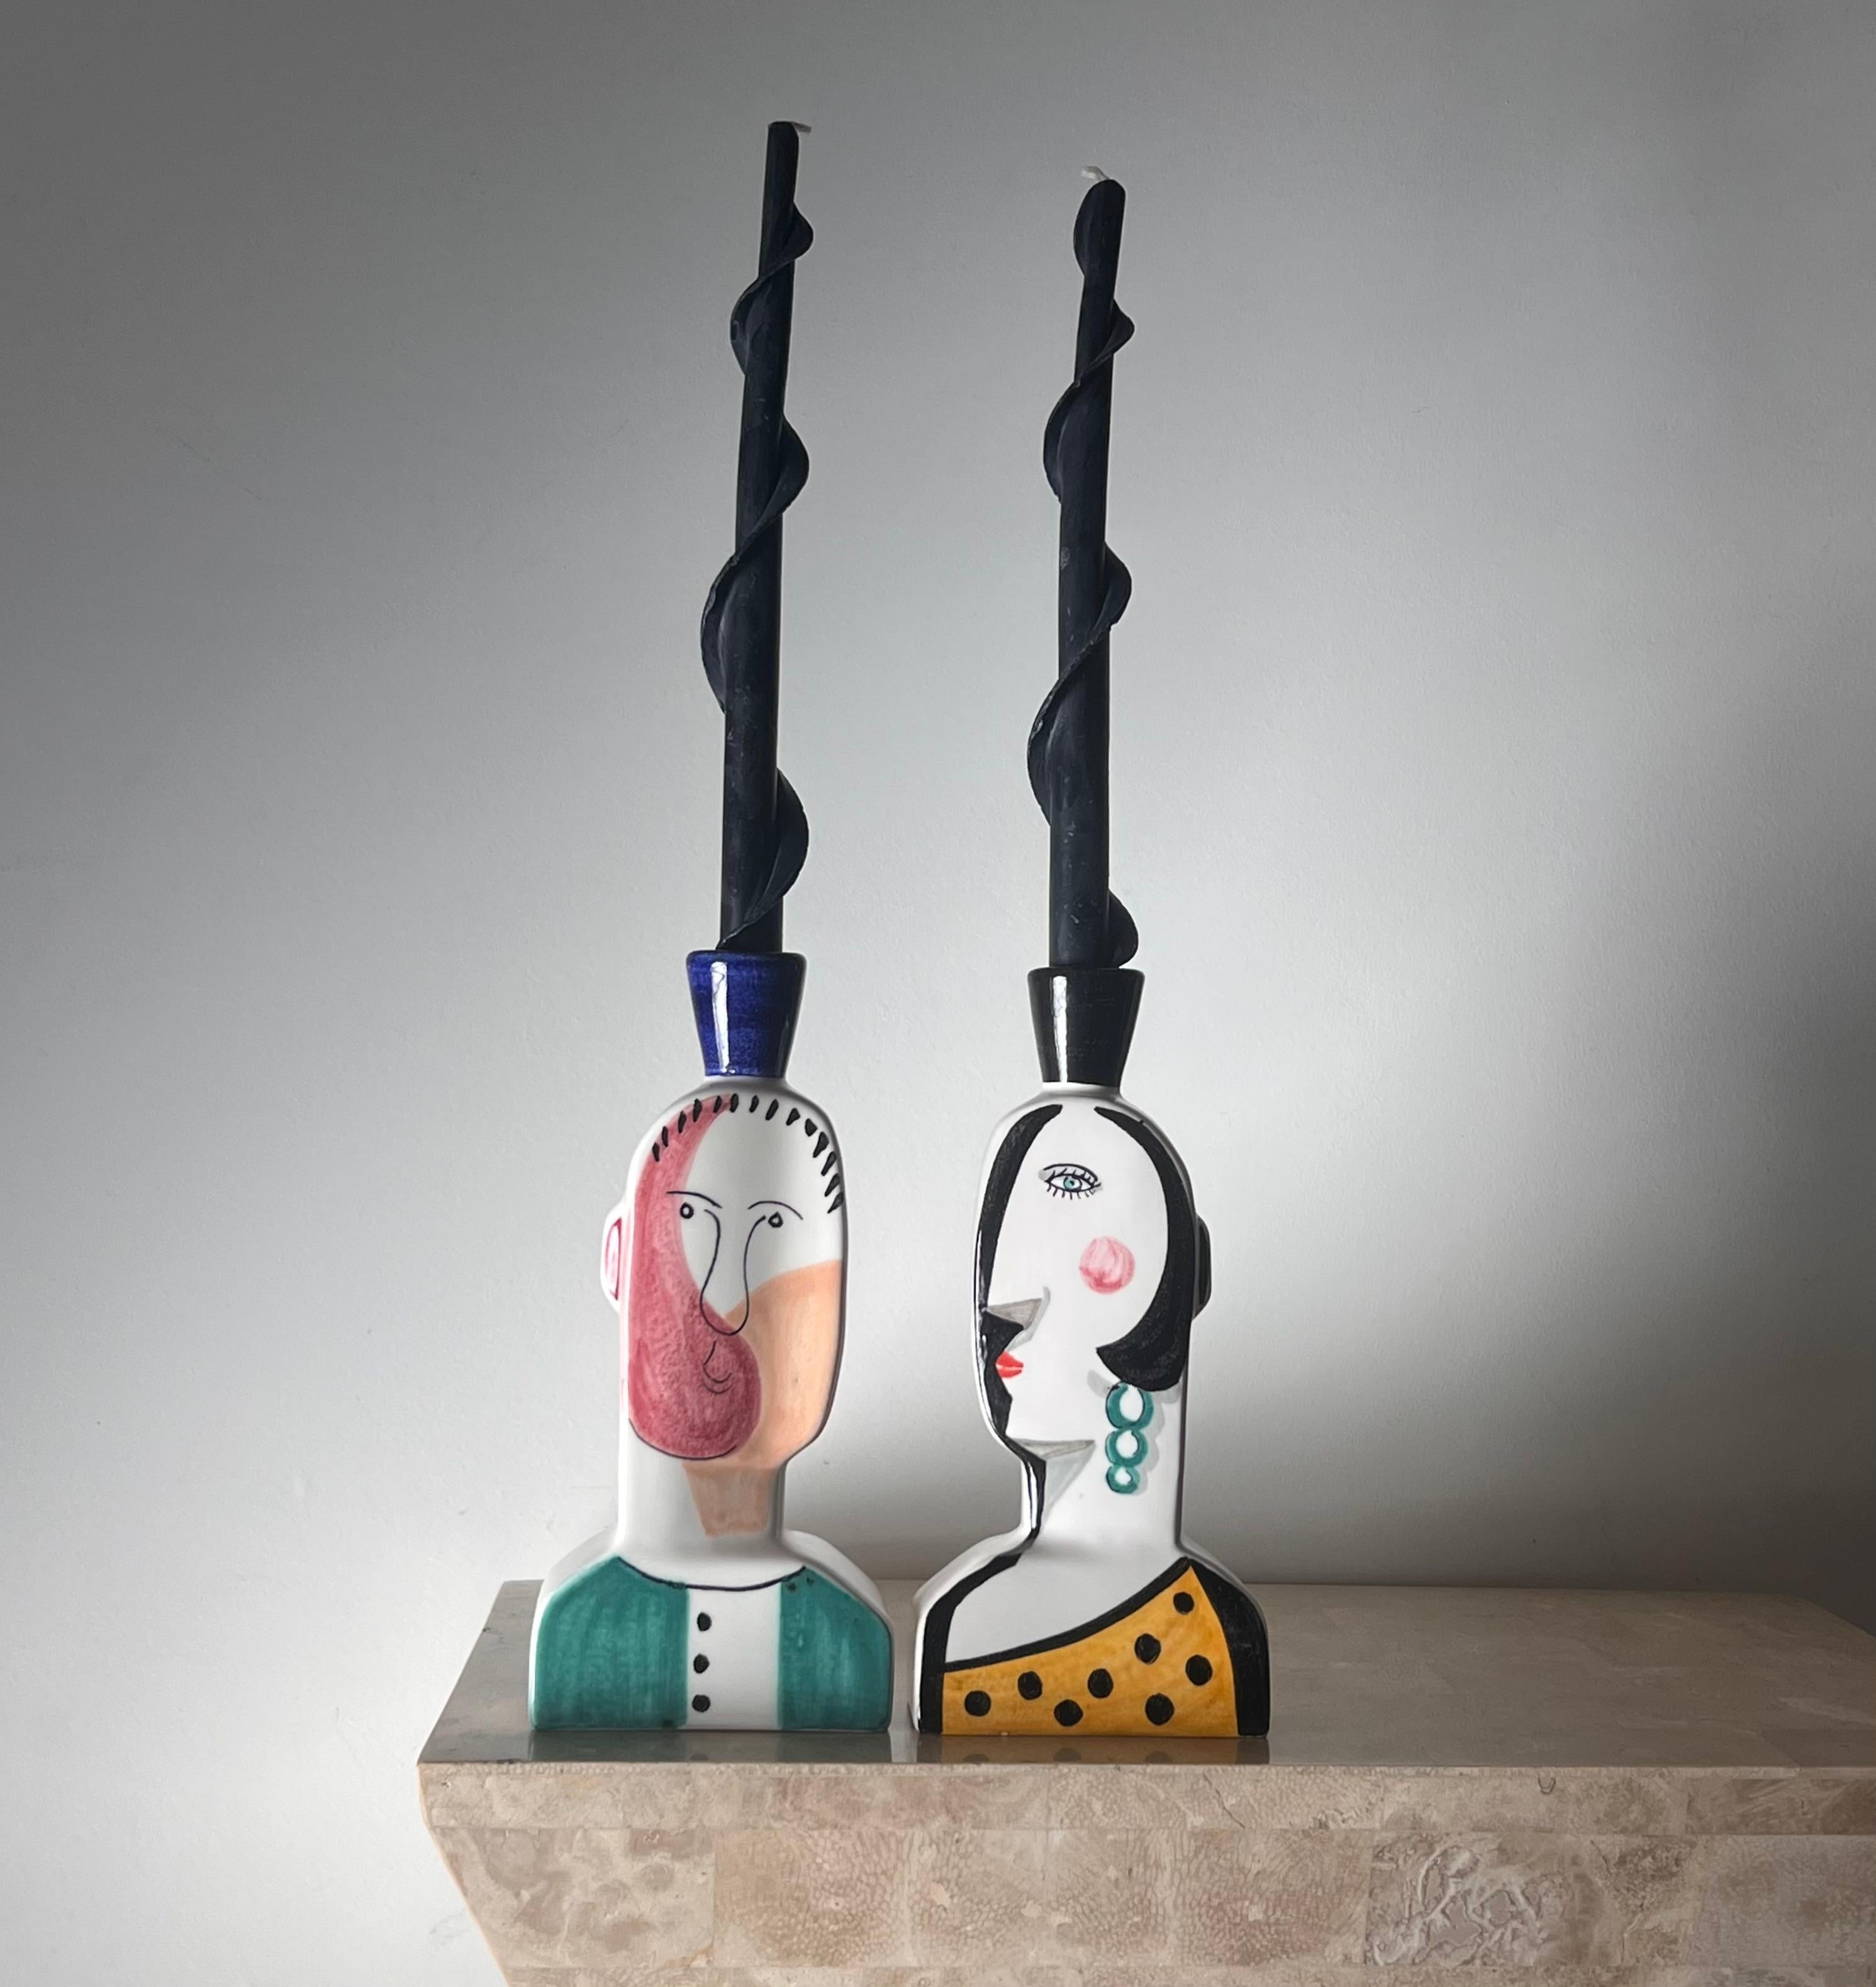 Spanish Cubist figurative “Face” candlesticks, signed by artist, 20th century 10